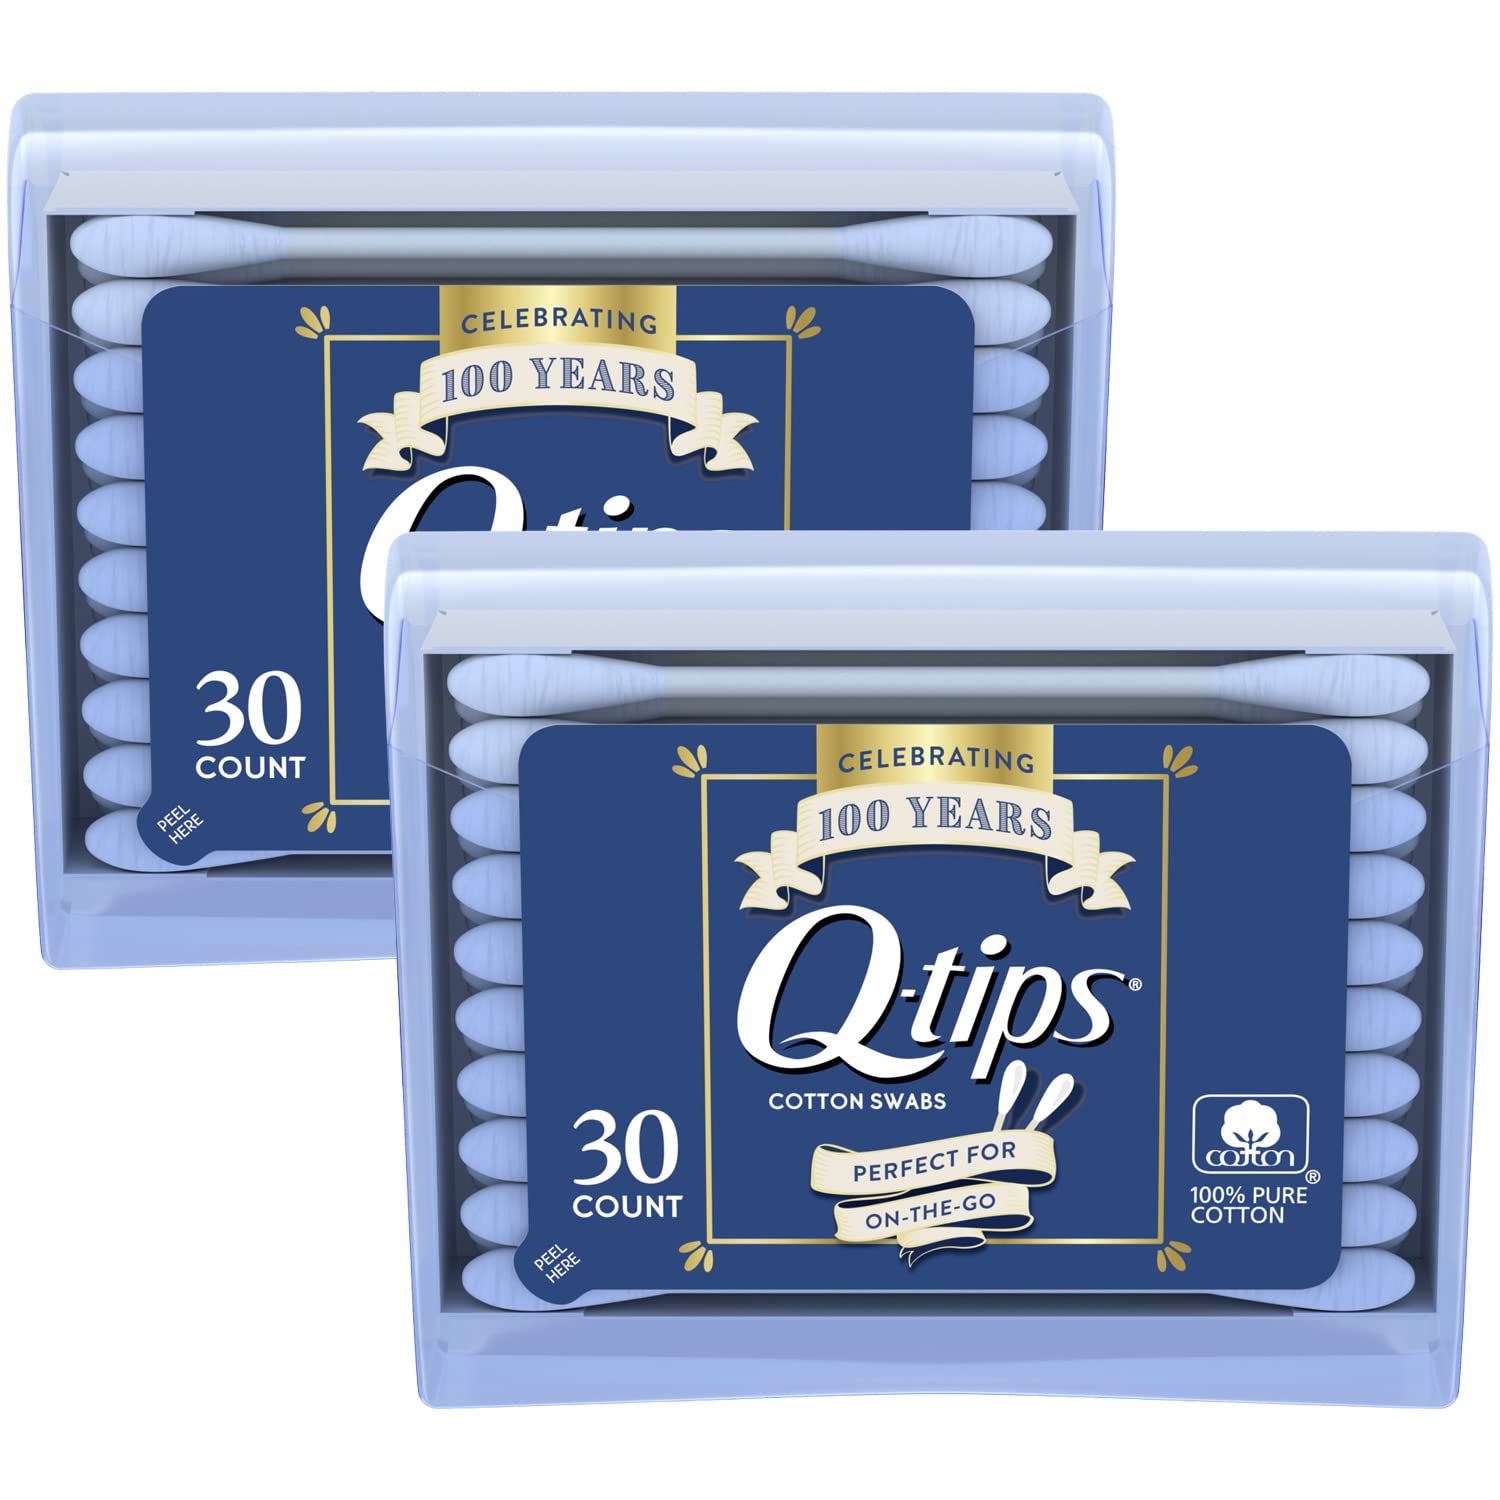 Q-tips Cotton Swabs - Travel Q-tips for Beauty Makeup Nails Men's Grooming  and More Perfect for On the Go Travel Size Case 30 Count Ea (Pack of 2)